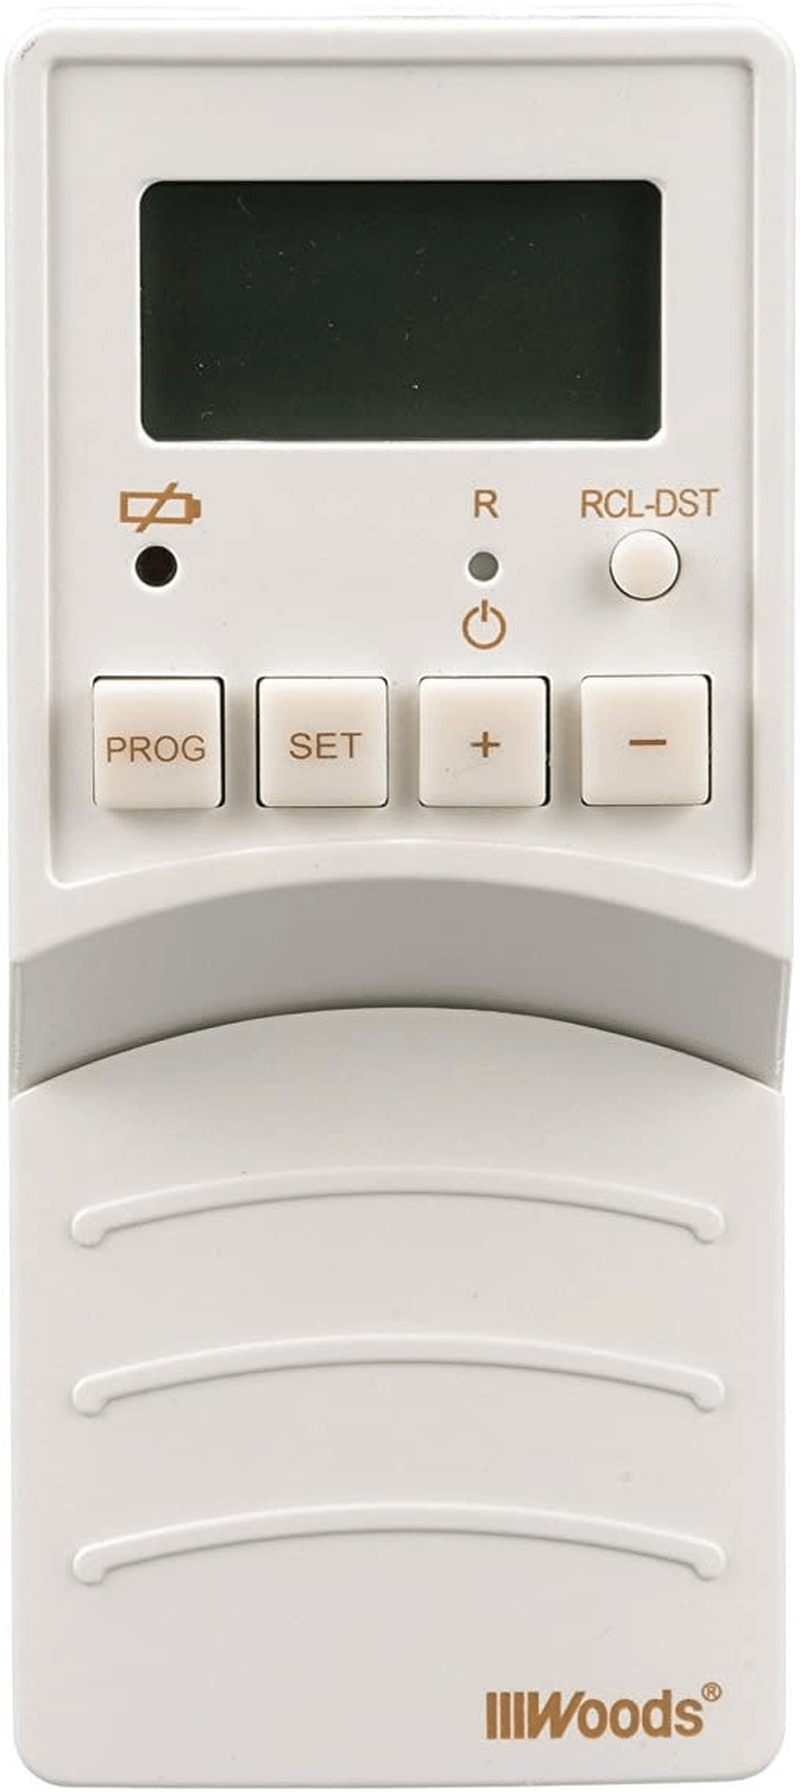 Woods 59744 59744WD Flip Converts Toggle Switch Timer, User Friendly, Slim Design, Energy Saving, Battery Operated, Easily Programmable with Adjustable Settings, White